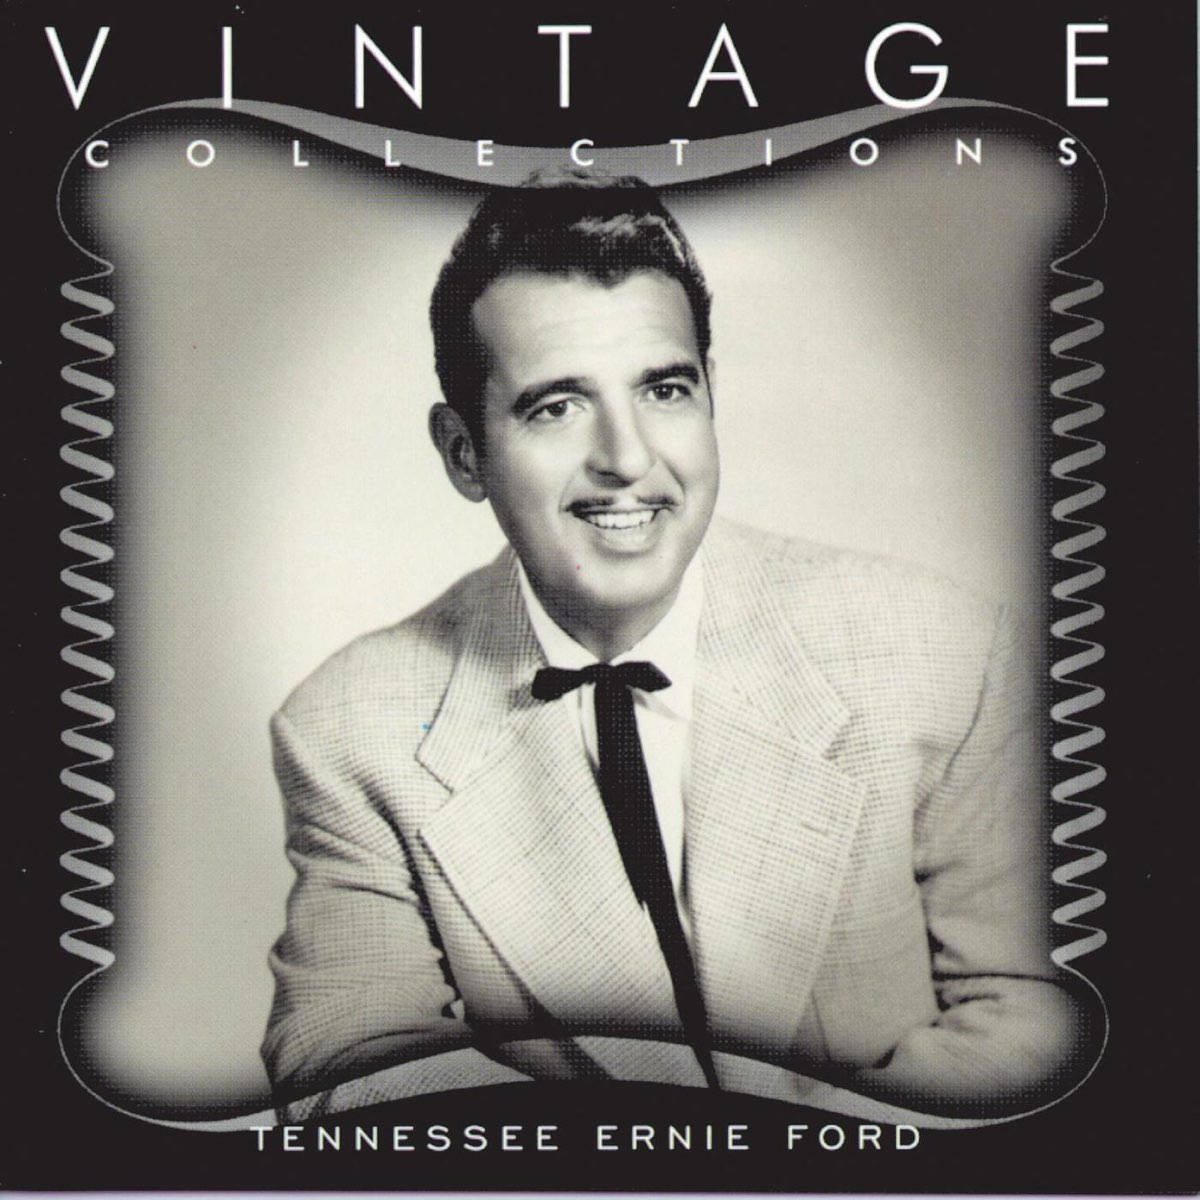 "American Singer Tennessee Ernie Ford: The Vintage Collection" Wallpaper